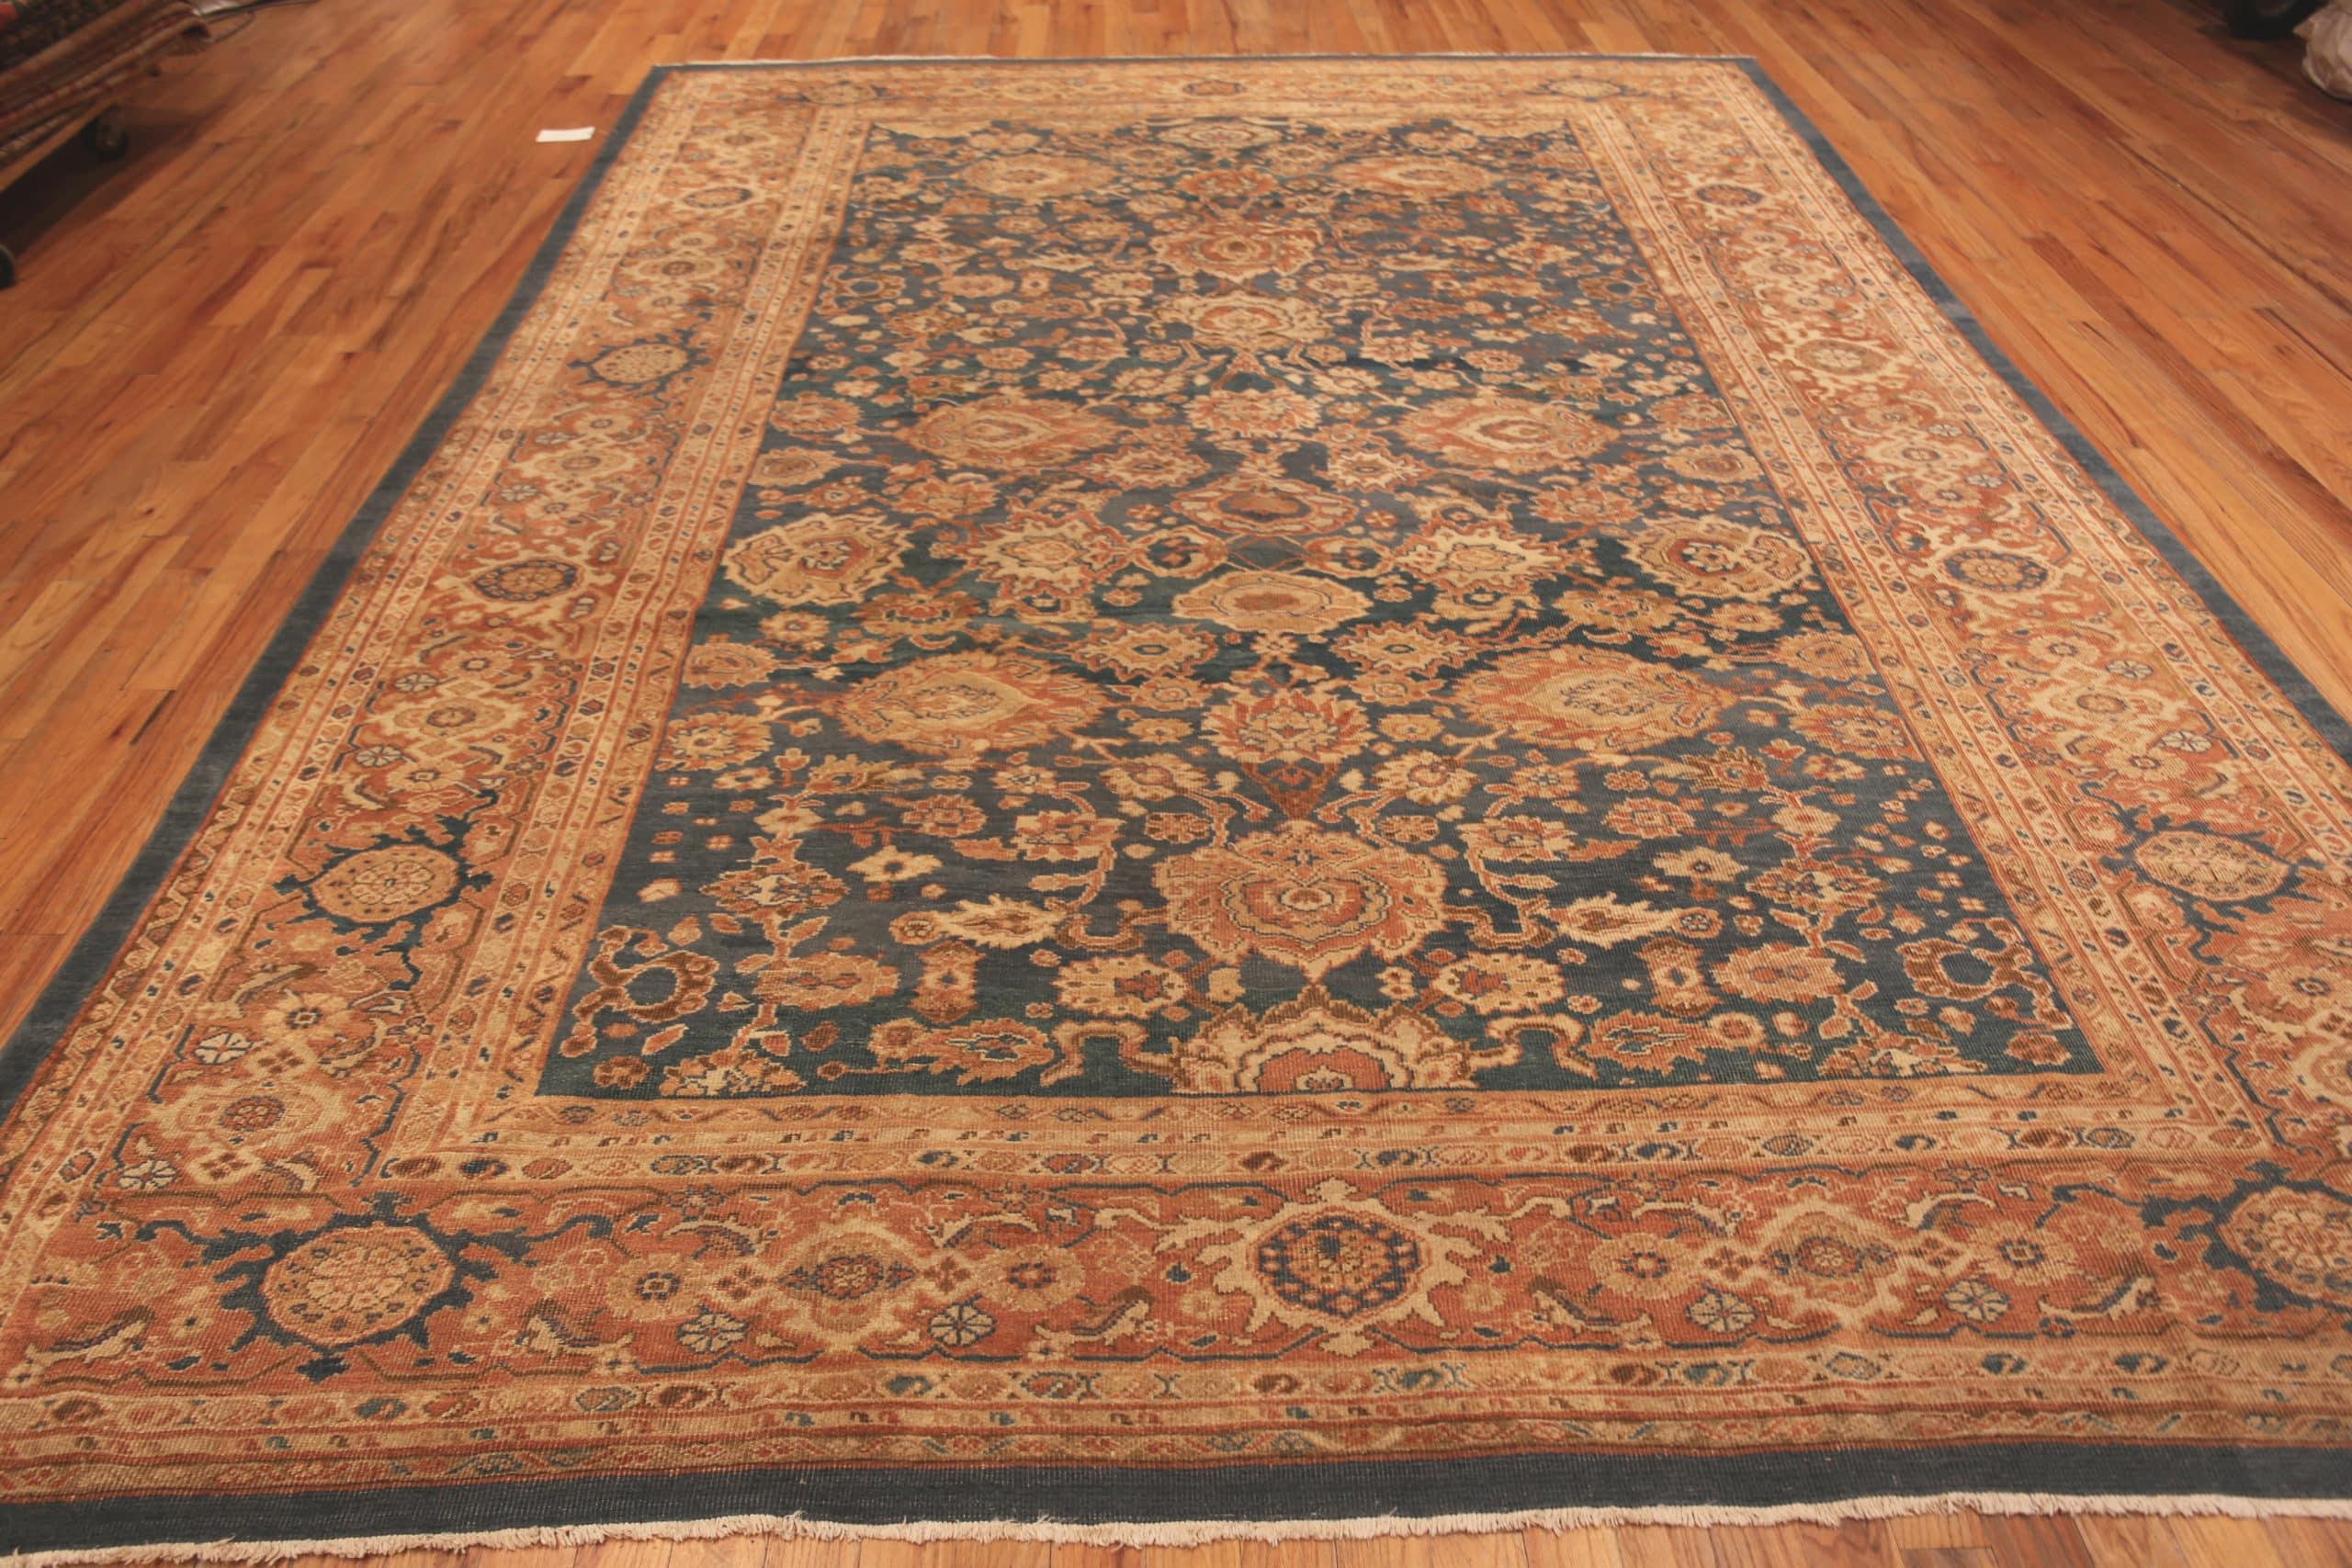 Classic Antique Rustic Persian Sultanabad Room Size Rug, Country of Origin: Persia, Circa Date: 1880. Size: 9 ft 10 in x 13 ft 3 in (3 m x 4.04 m)